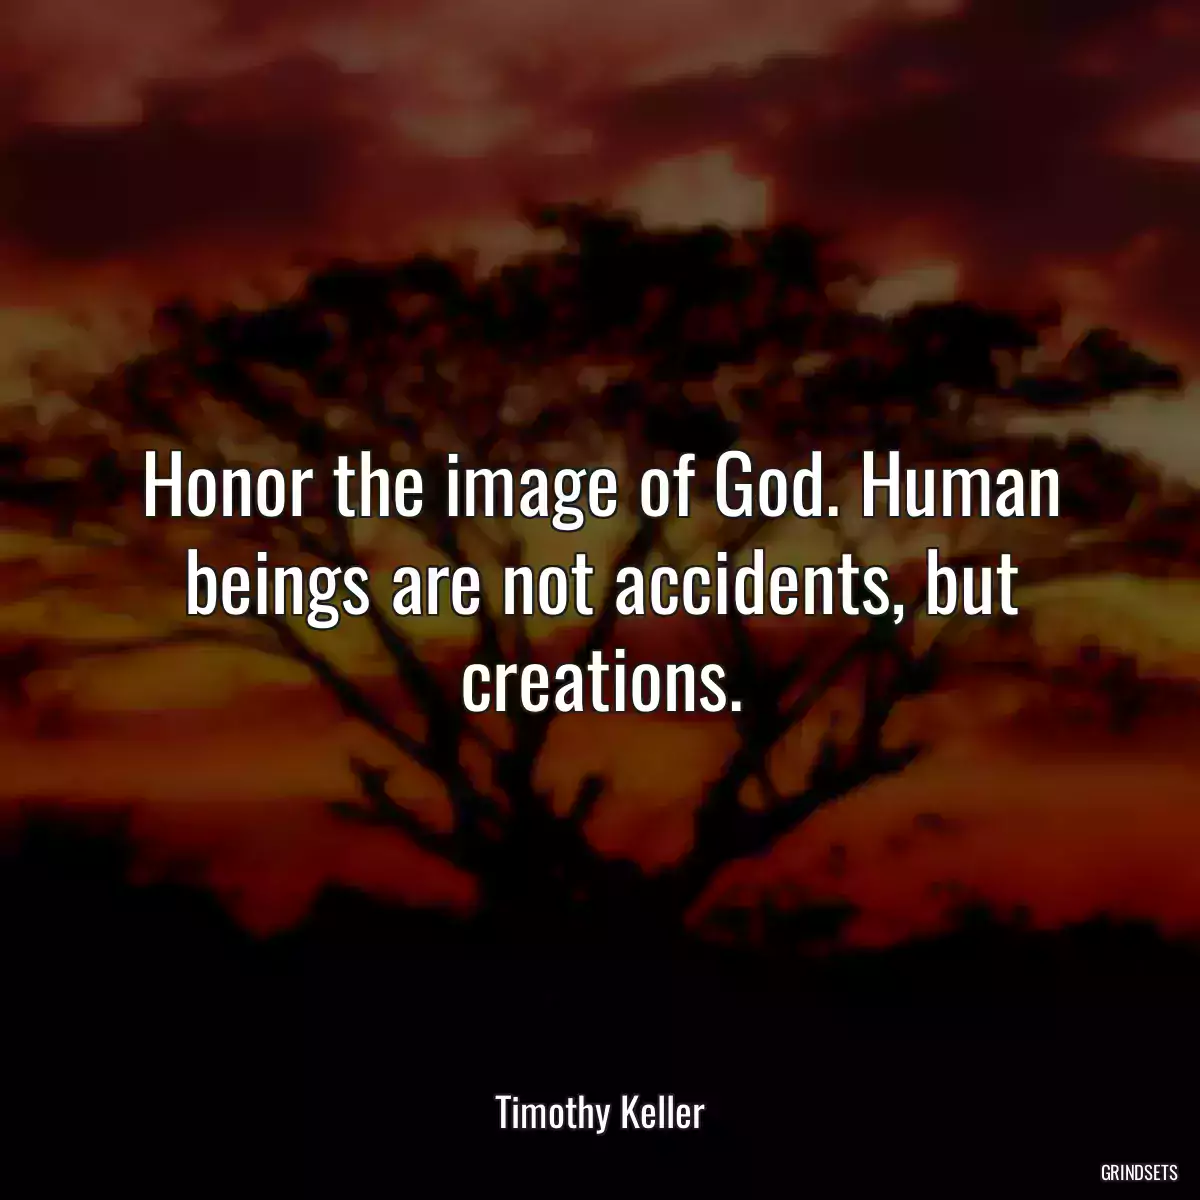 Honor the image of God. Human beings are not accidents, but creations.